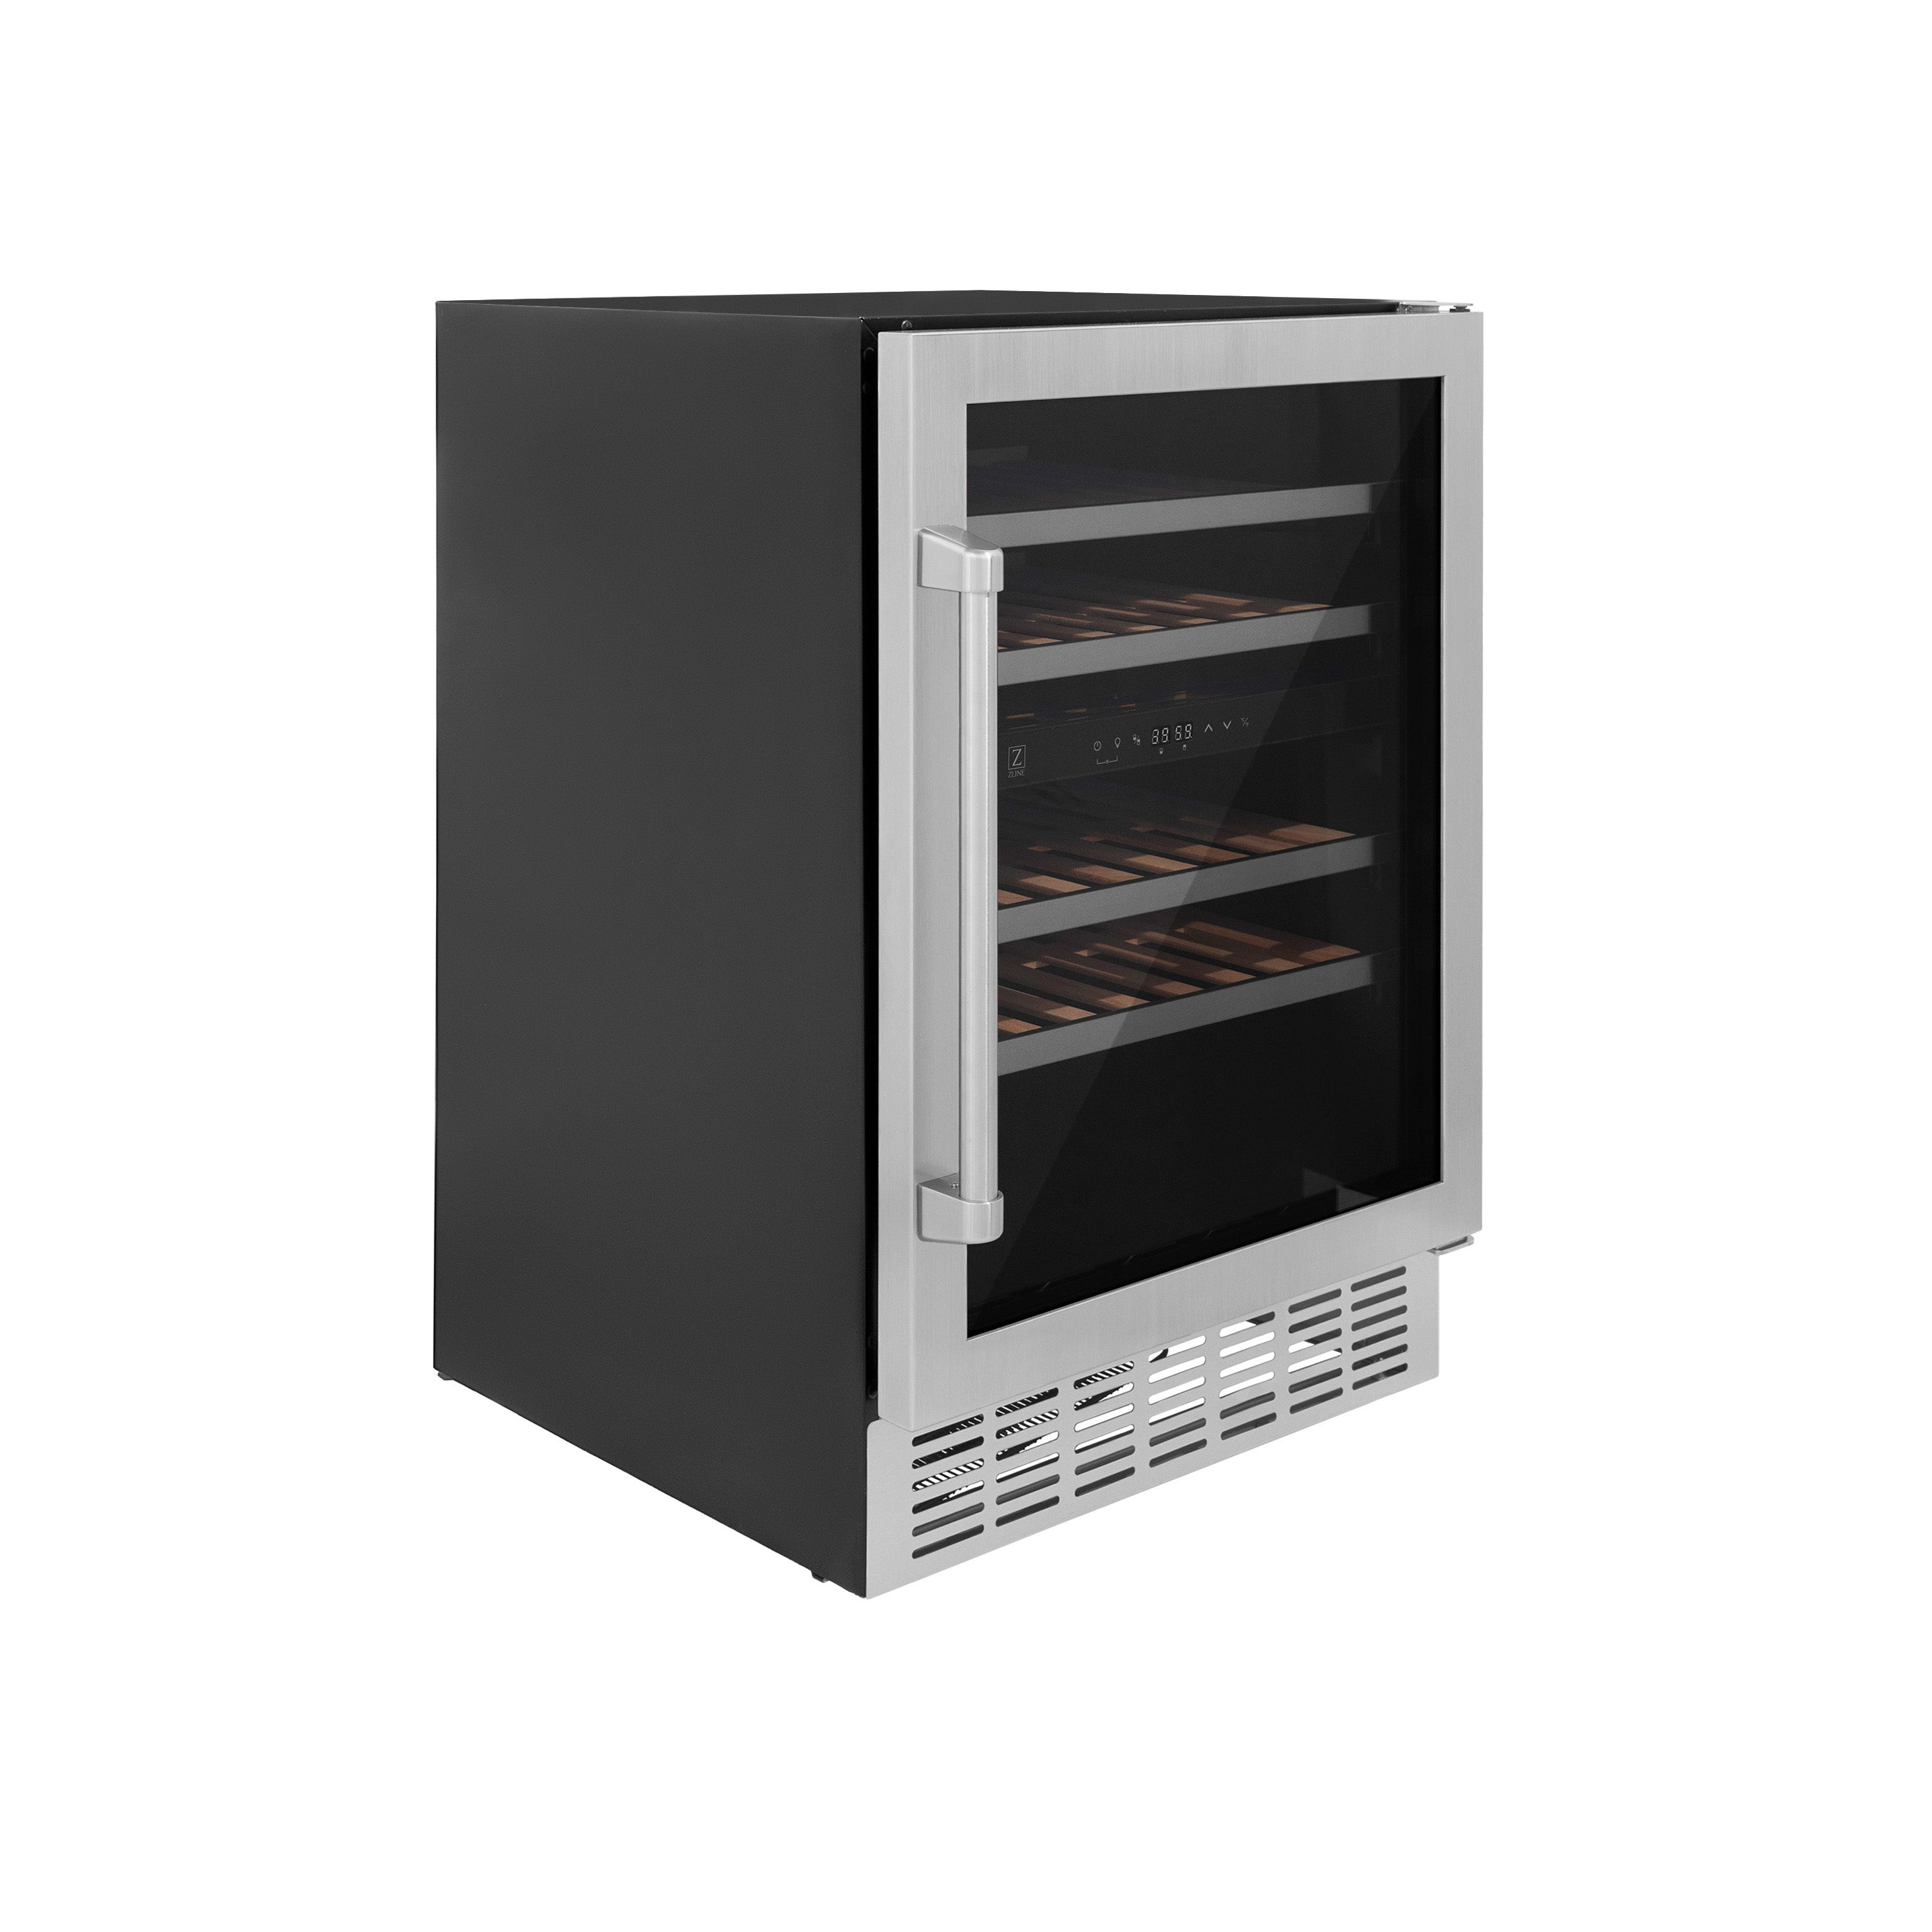 ZLINE 24" Dual Zone 44-Bottle Wine Cooler in Stainless Steel with Wood Shelf (RWV-UD-24) - New Star Living